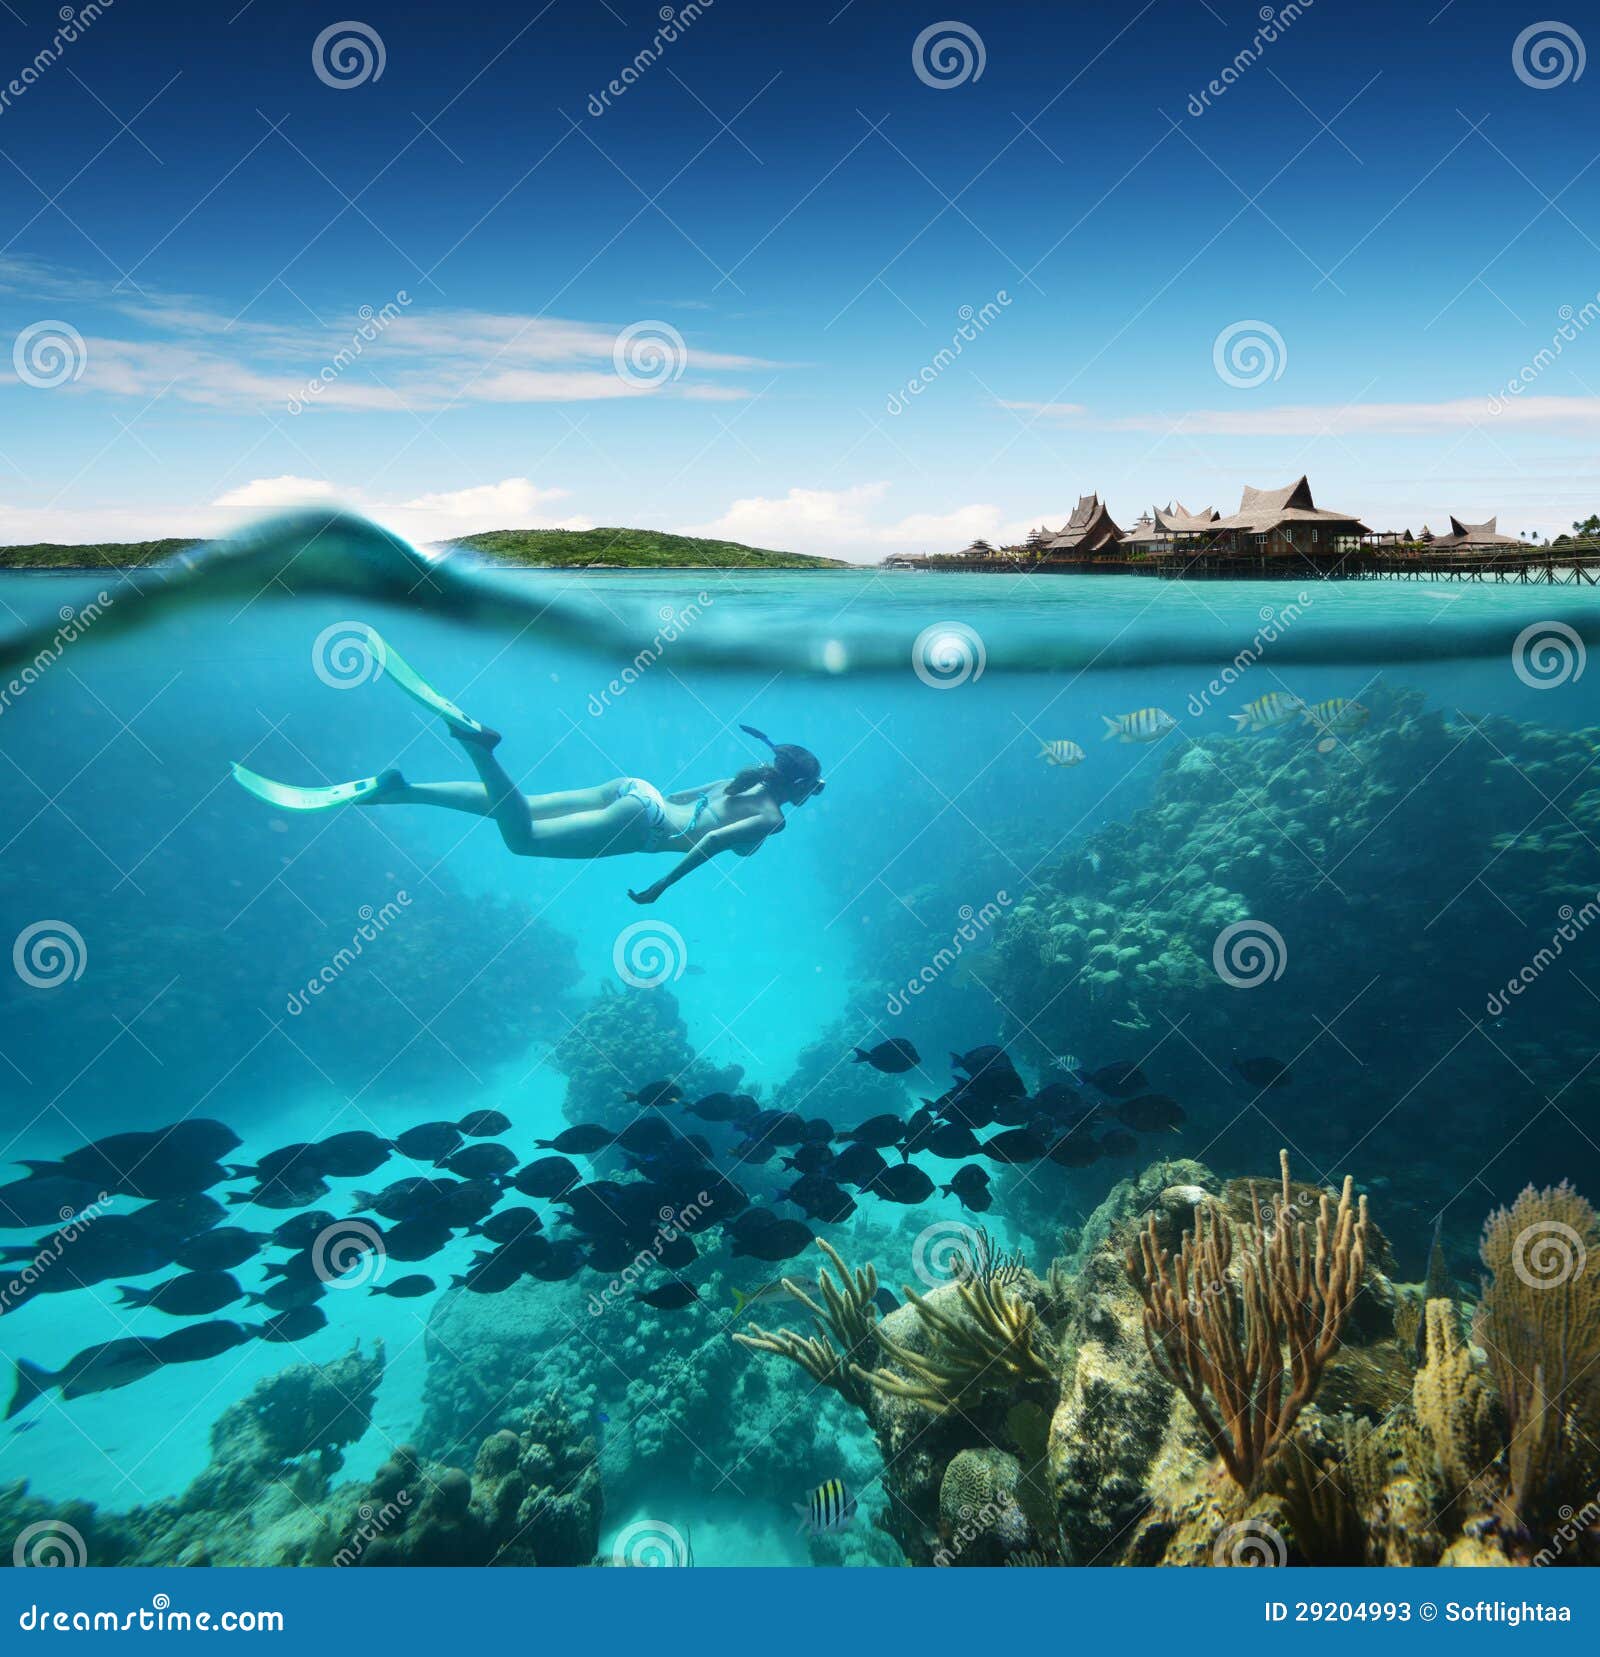 young woman snorkeling in the coral reef in the tropical sea